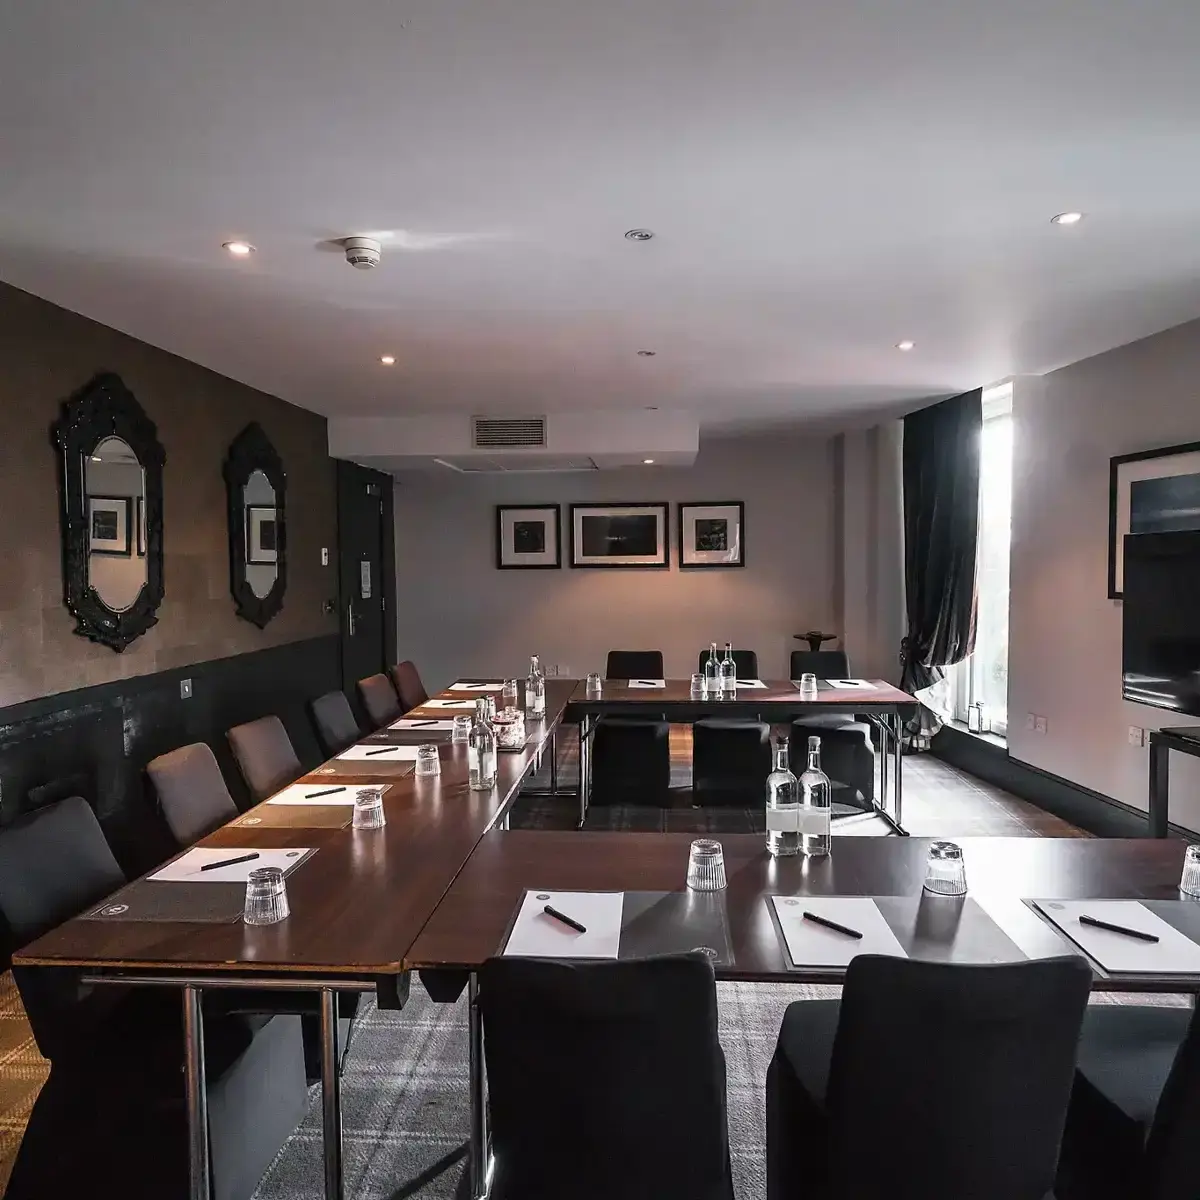 Malmaison Aberdeen Rubislaw Meeting room elegantly furnished featuring a lengthy table adorned with sleek black chairs.